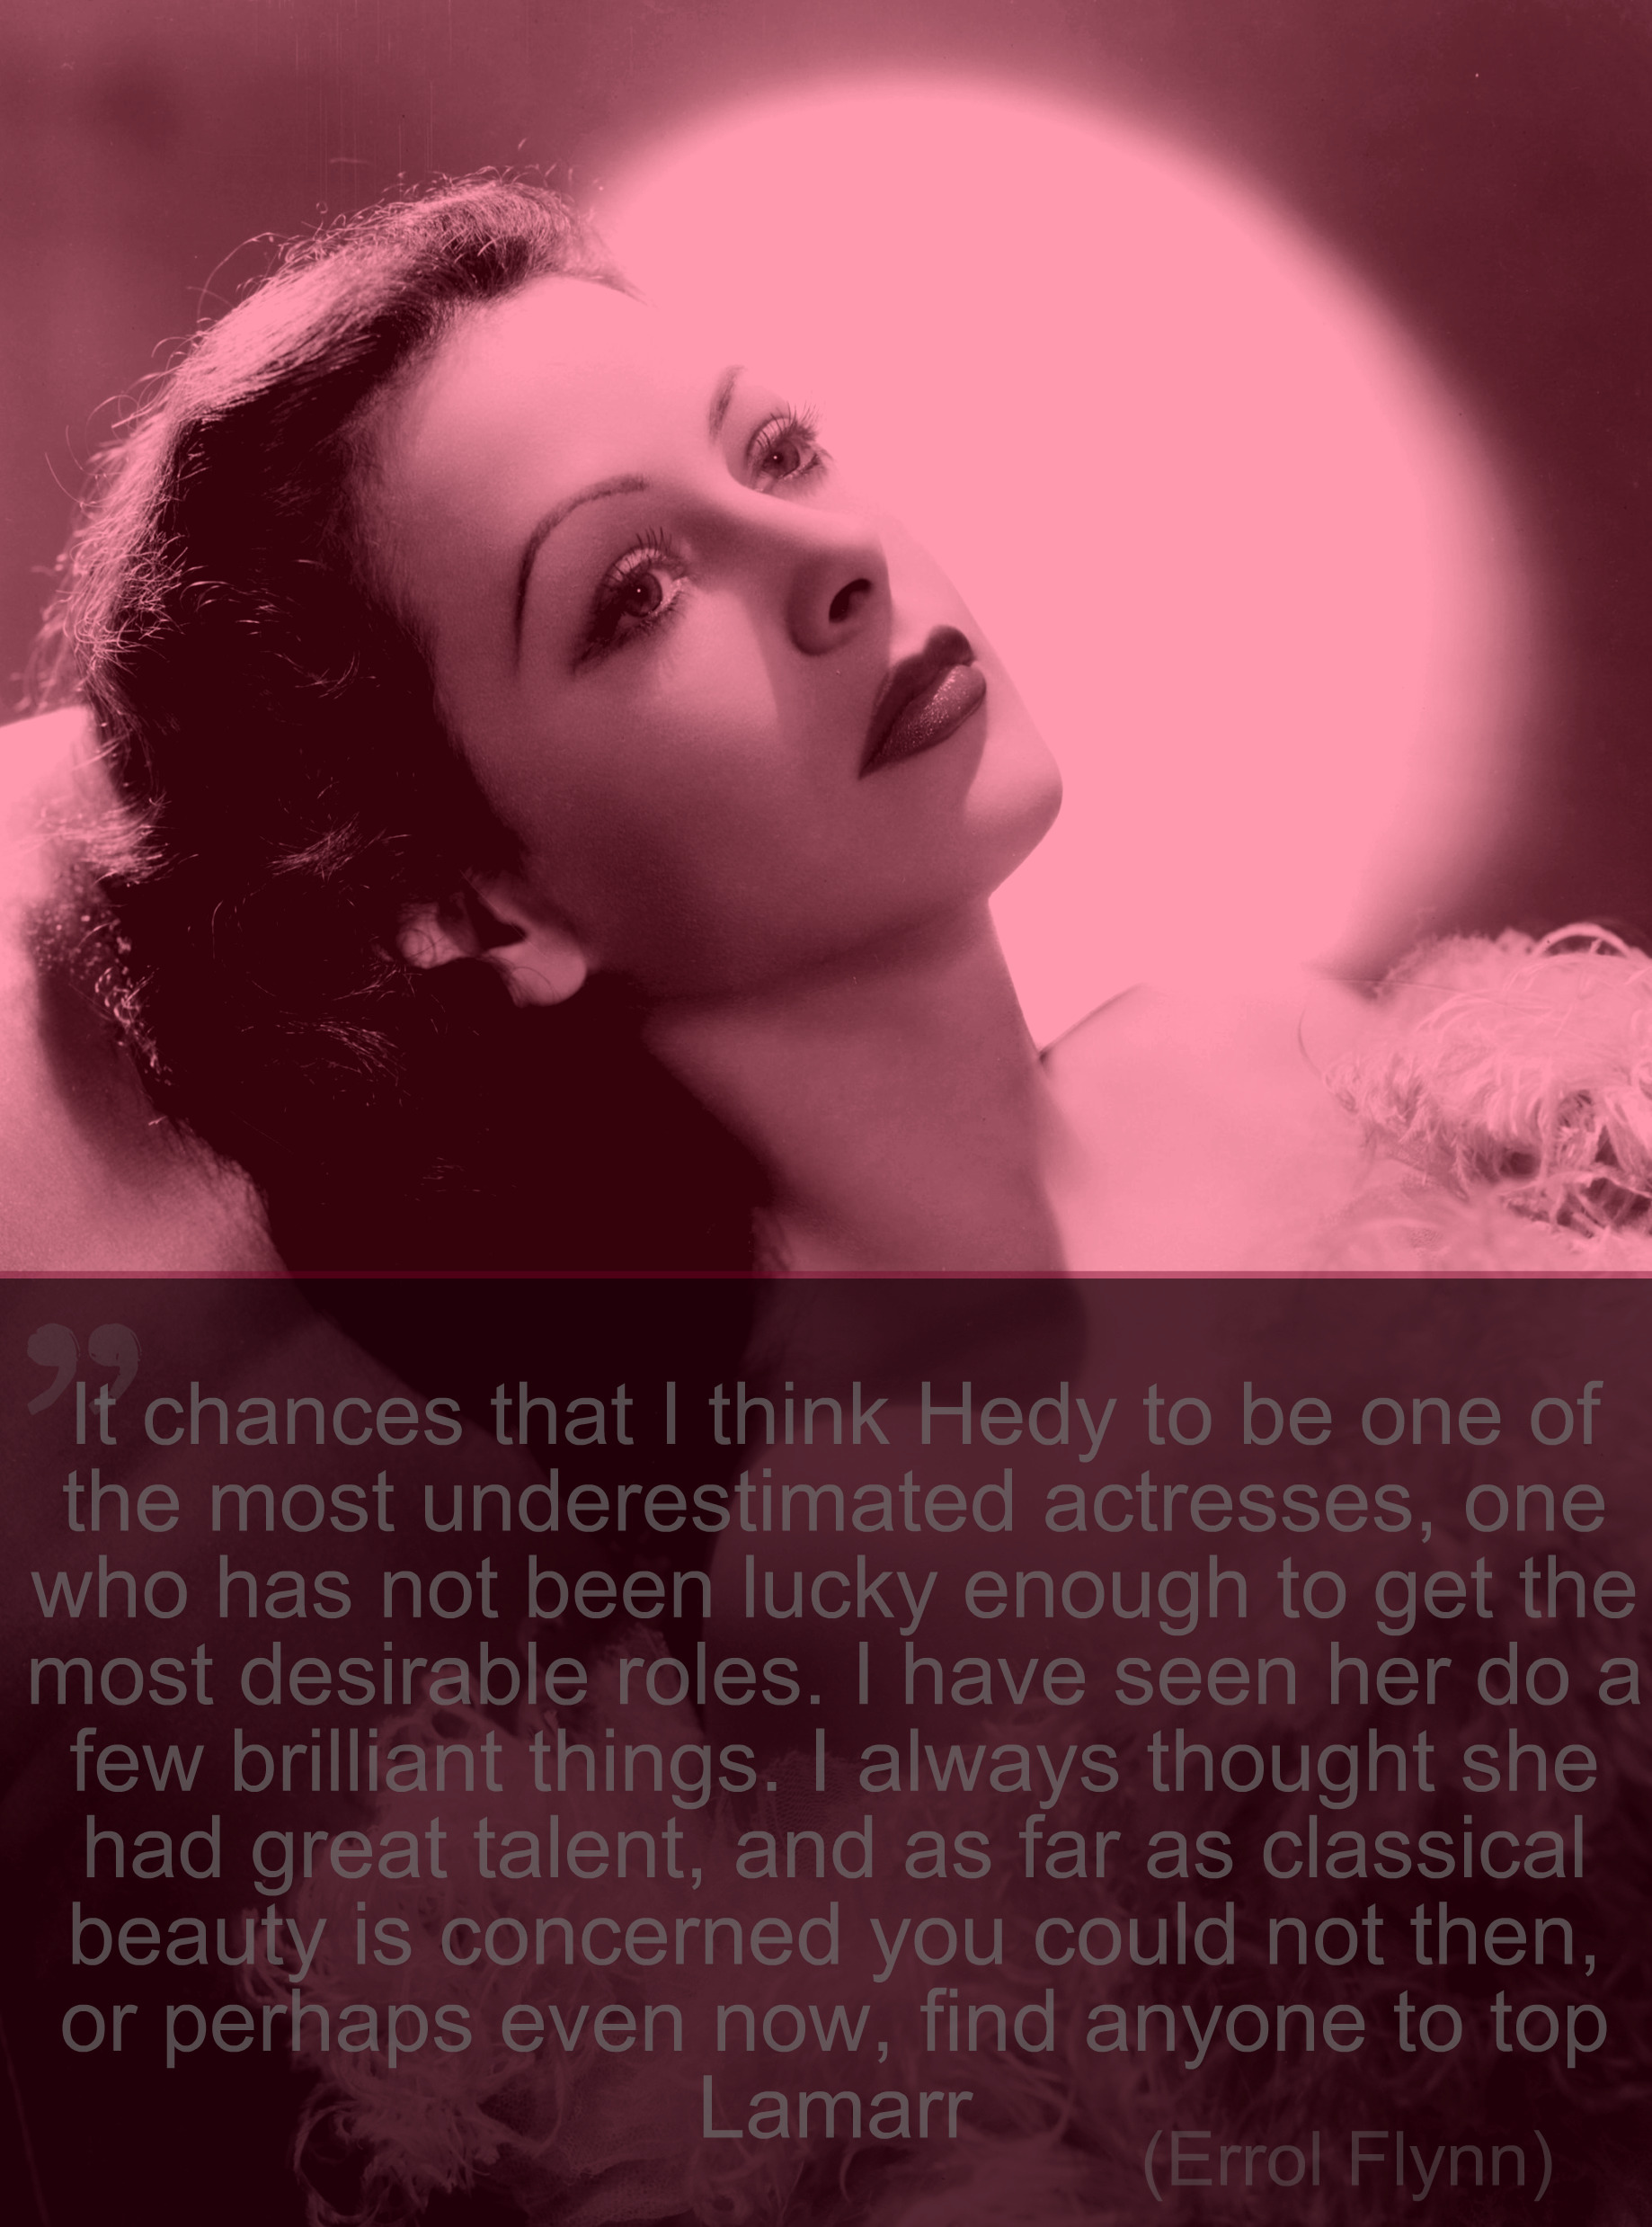 Hedy Lamarr as the lady of